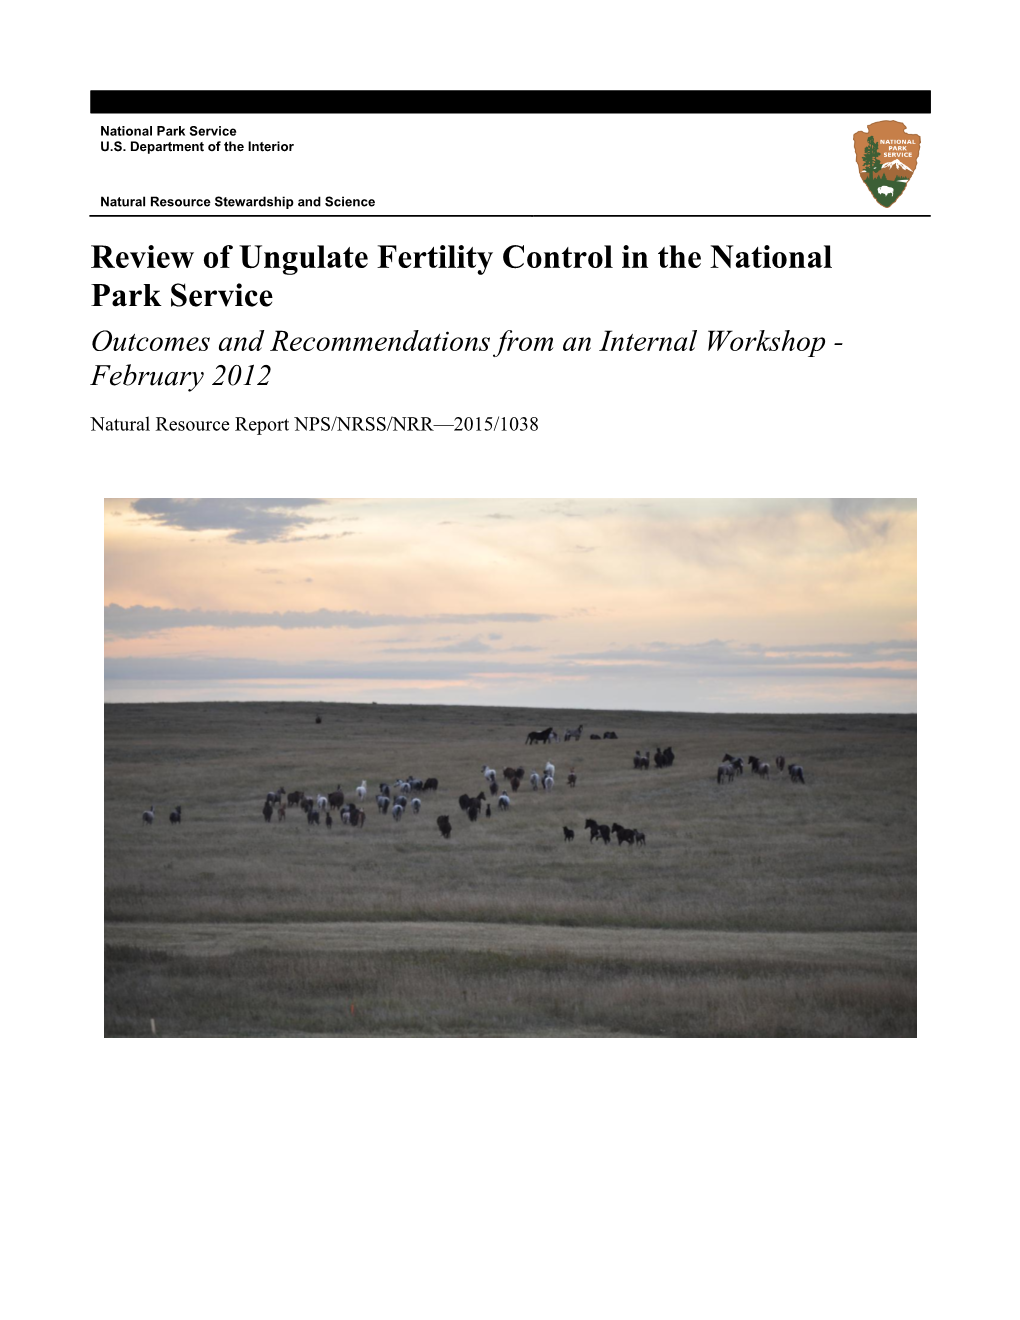 Review of Ungulate Fertility Control in the National Park Service Outcomes and Recommendations from an Internal Workshop - February 2012